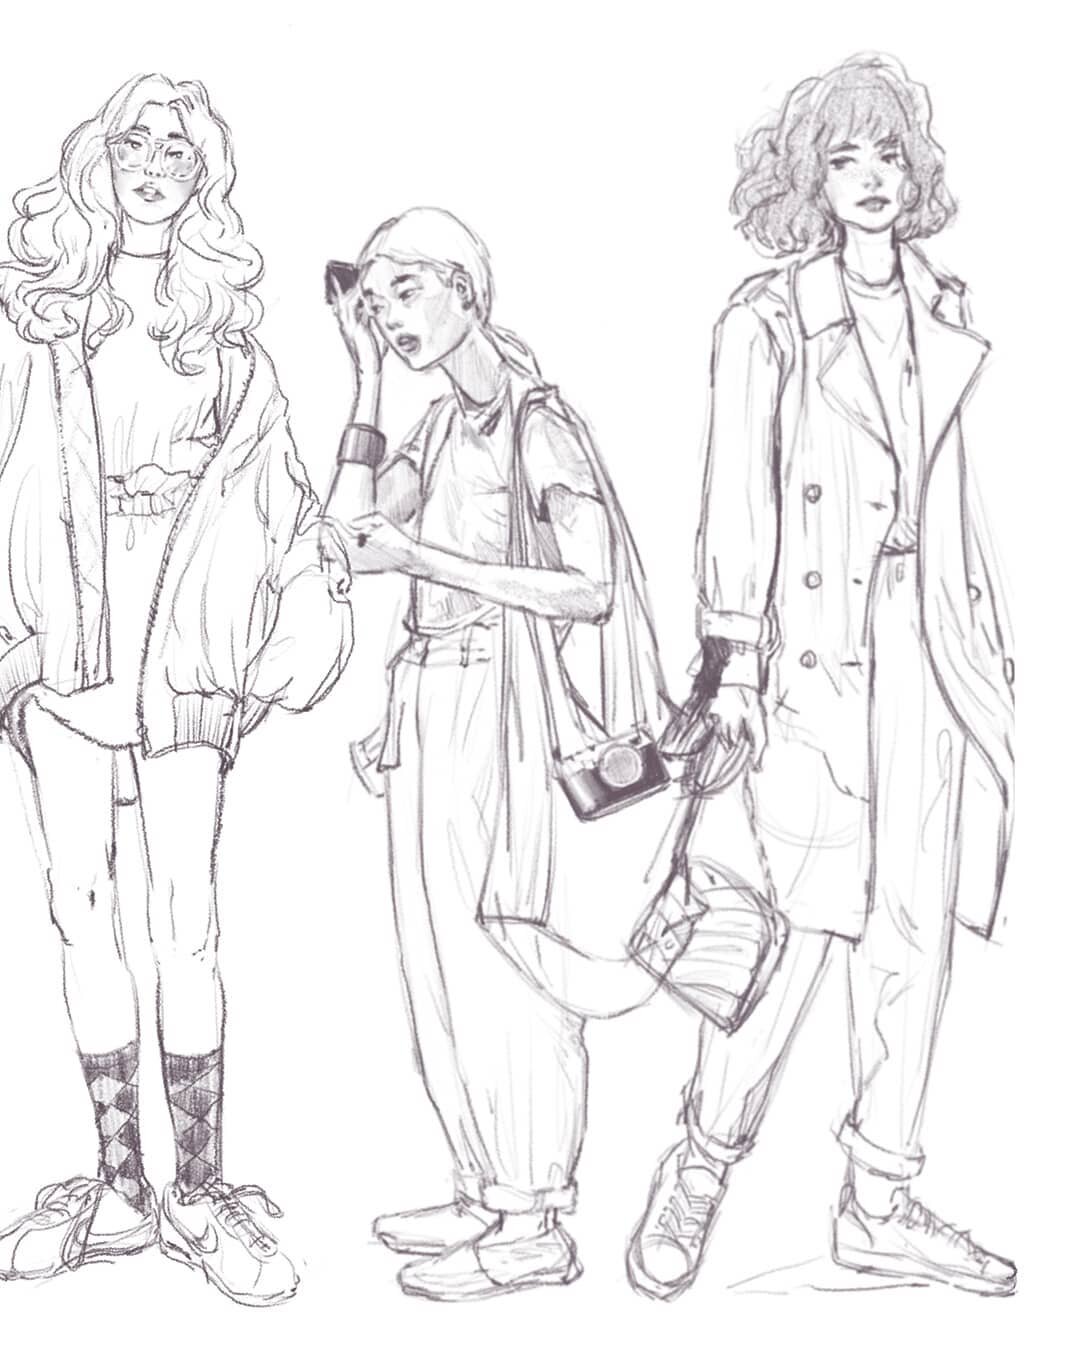 International Women's Day 2021 &bull; Pinterest street fashion studies &bull; Sketches in Procreate 

Which outfit do you want to wear?